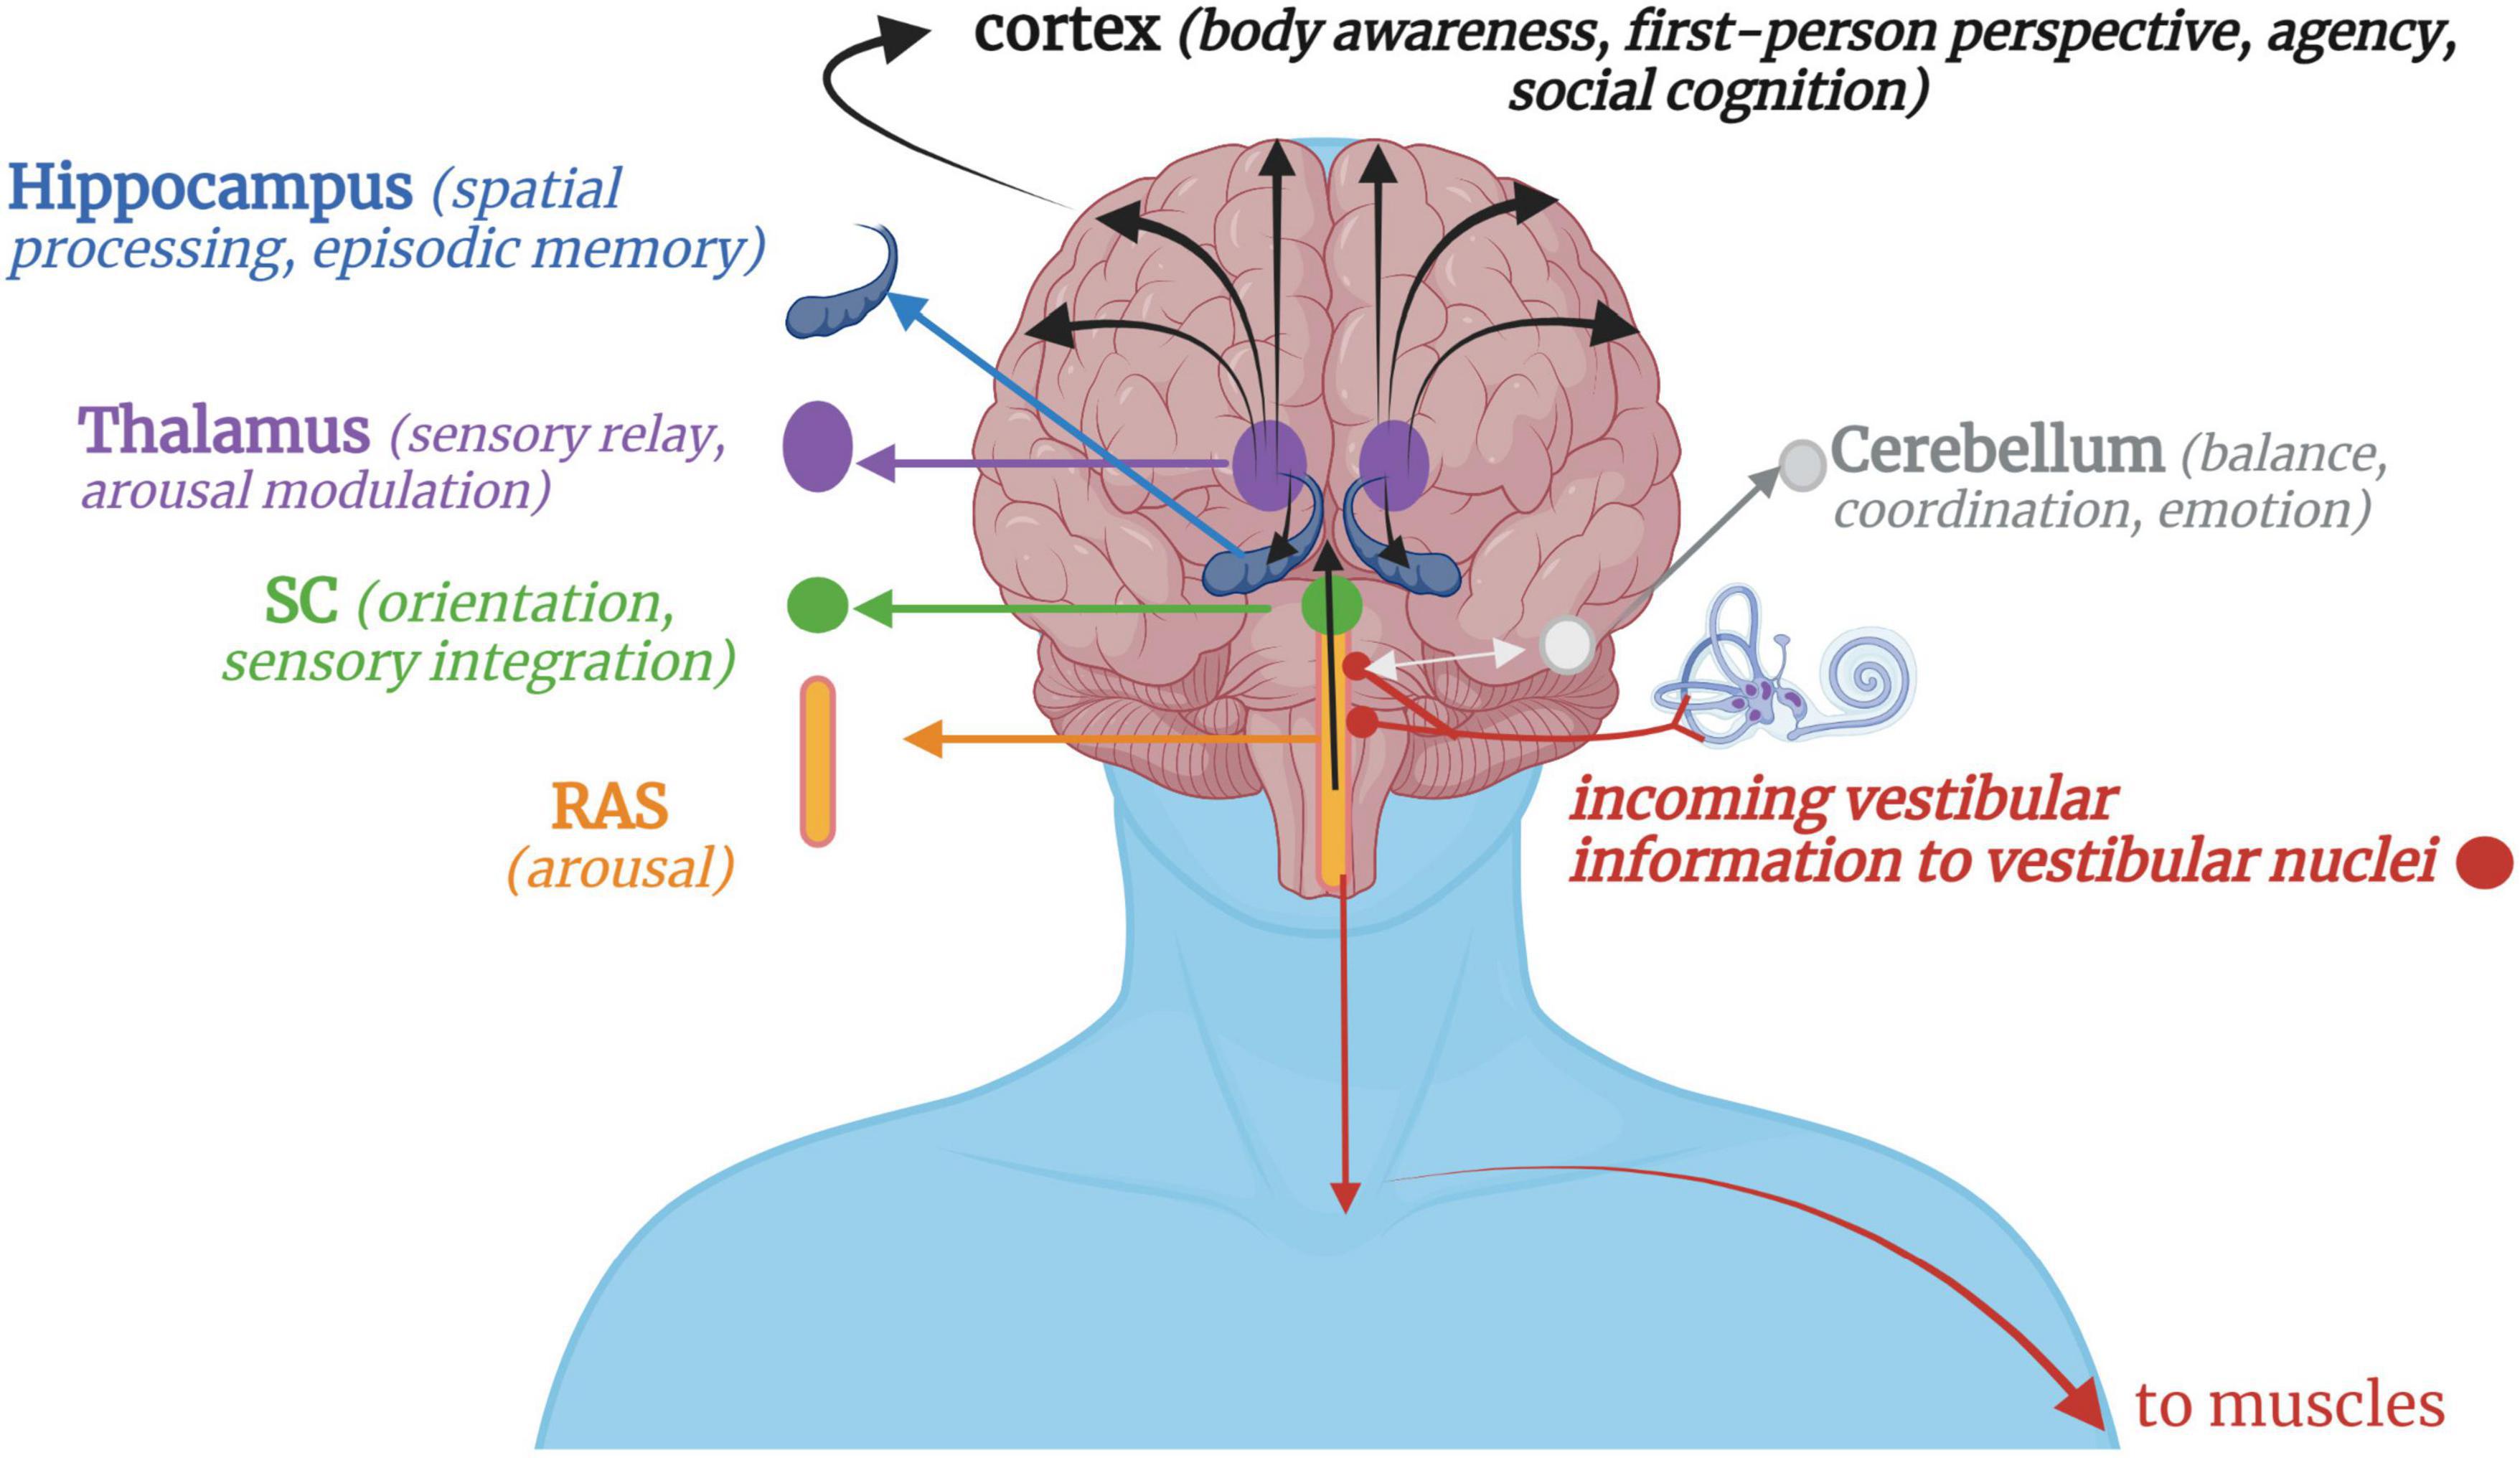 Frontiers | The brain-body disconnect: A somatic sensory basis for